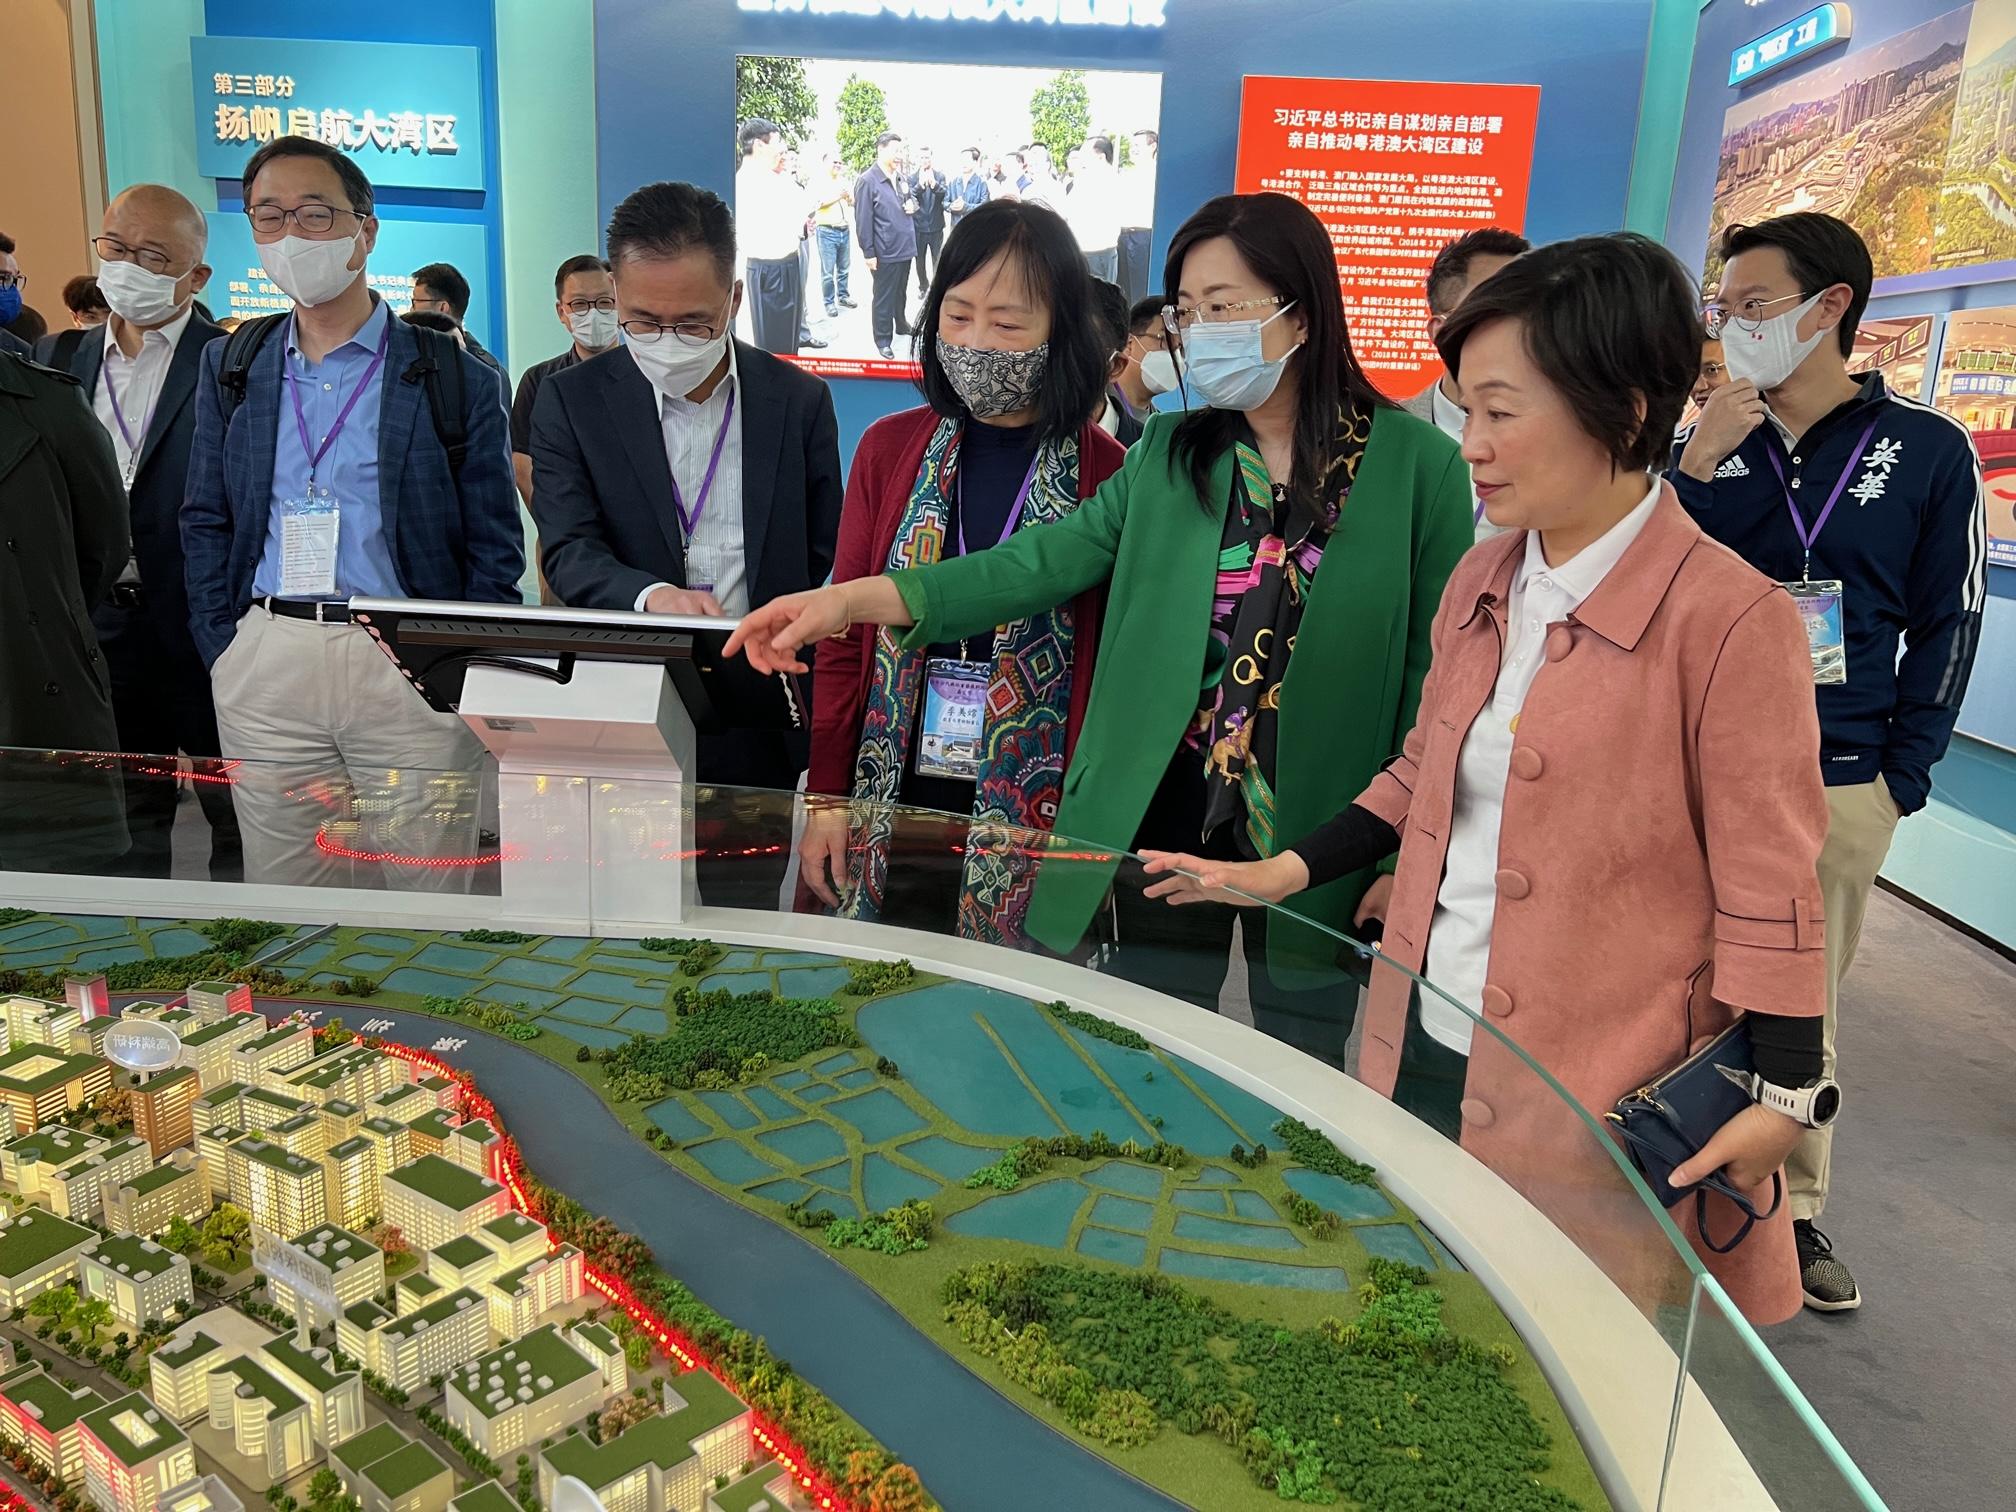 The Secretary for Education, Dr Choi Yuk-lin, today (March 9) led a delegation to visit Shenzhen and Guangzhou to inspect the relevant arrangements for Mainland study tours of the senior secondary subject of Citizenship and Social Development. Photo shows Dr Choi (first right) and the Permanent Secretary for Education, Ms Michelle Li (third right), with other members of the delegation touring an exhibition celebrating the 40th anniversary of the Shenzhen Special Economic Zone at the Shenzhen Qianhai International Convention Center.